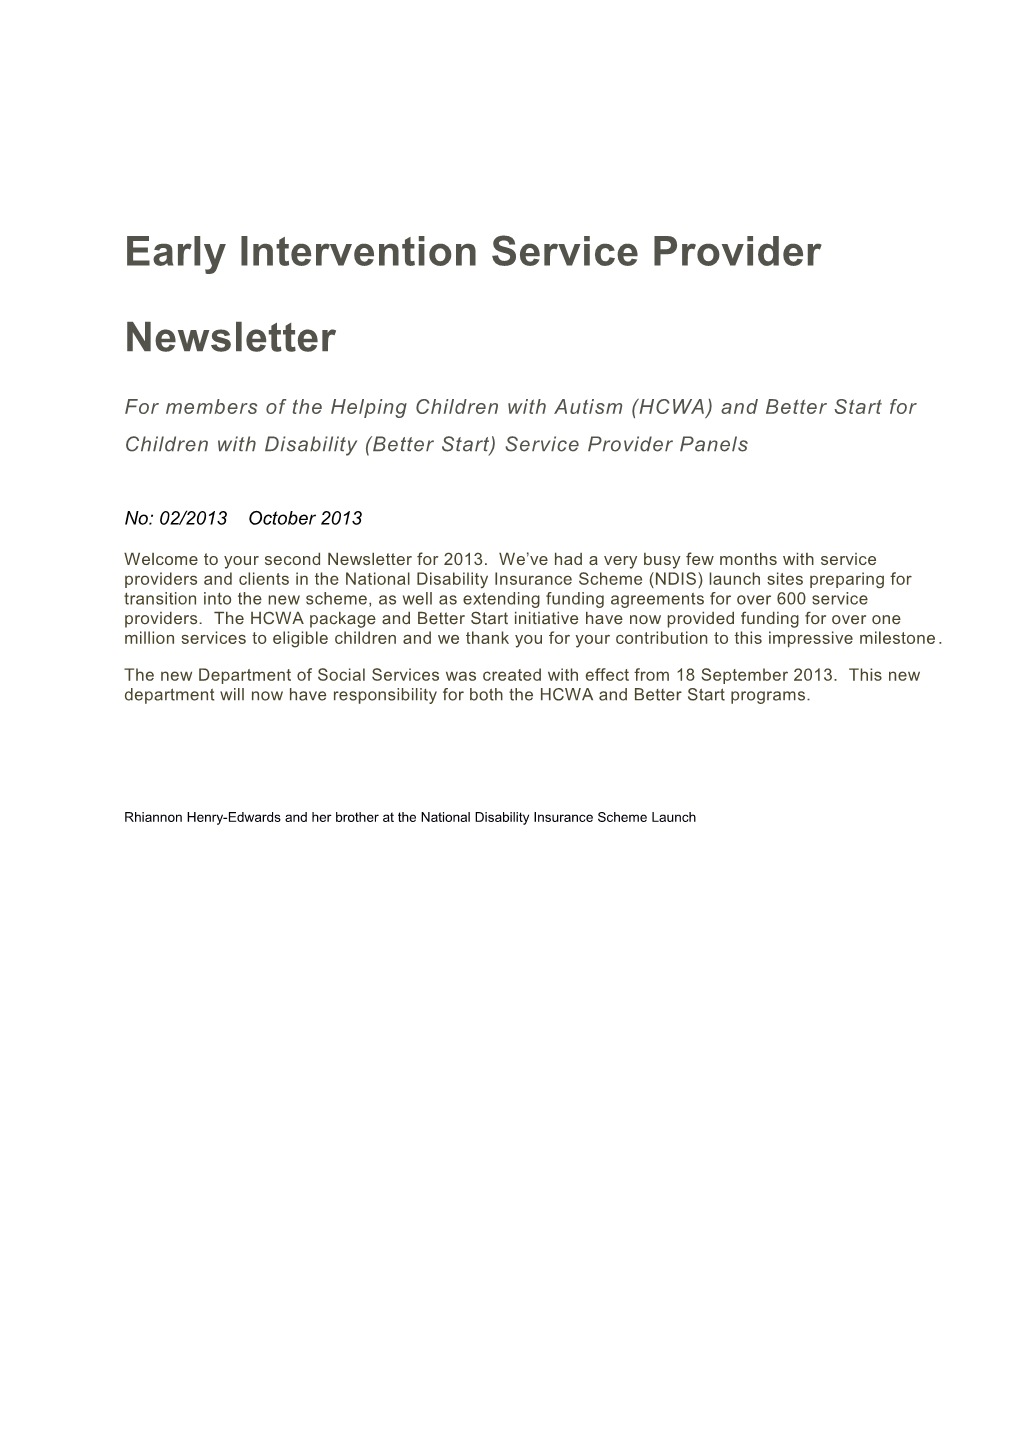 Early Intervention Service Provider Newsletter